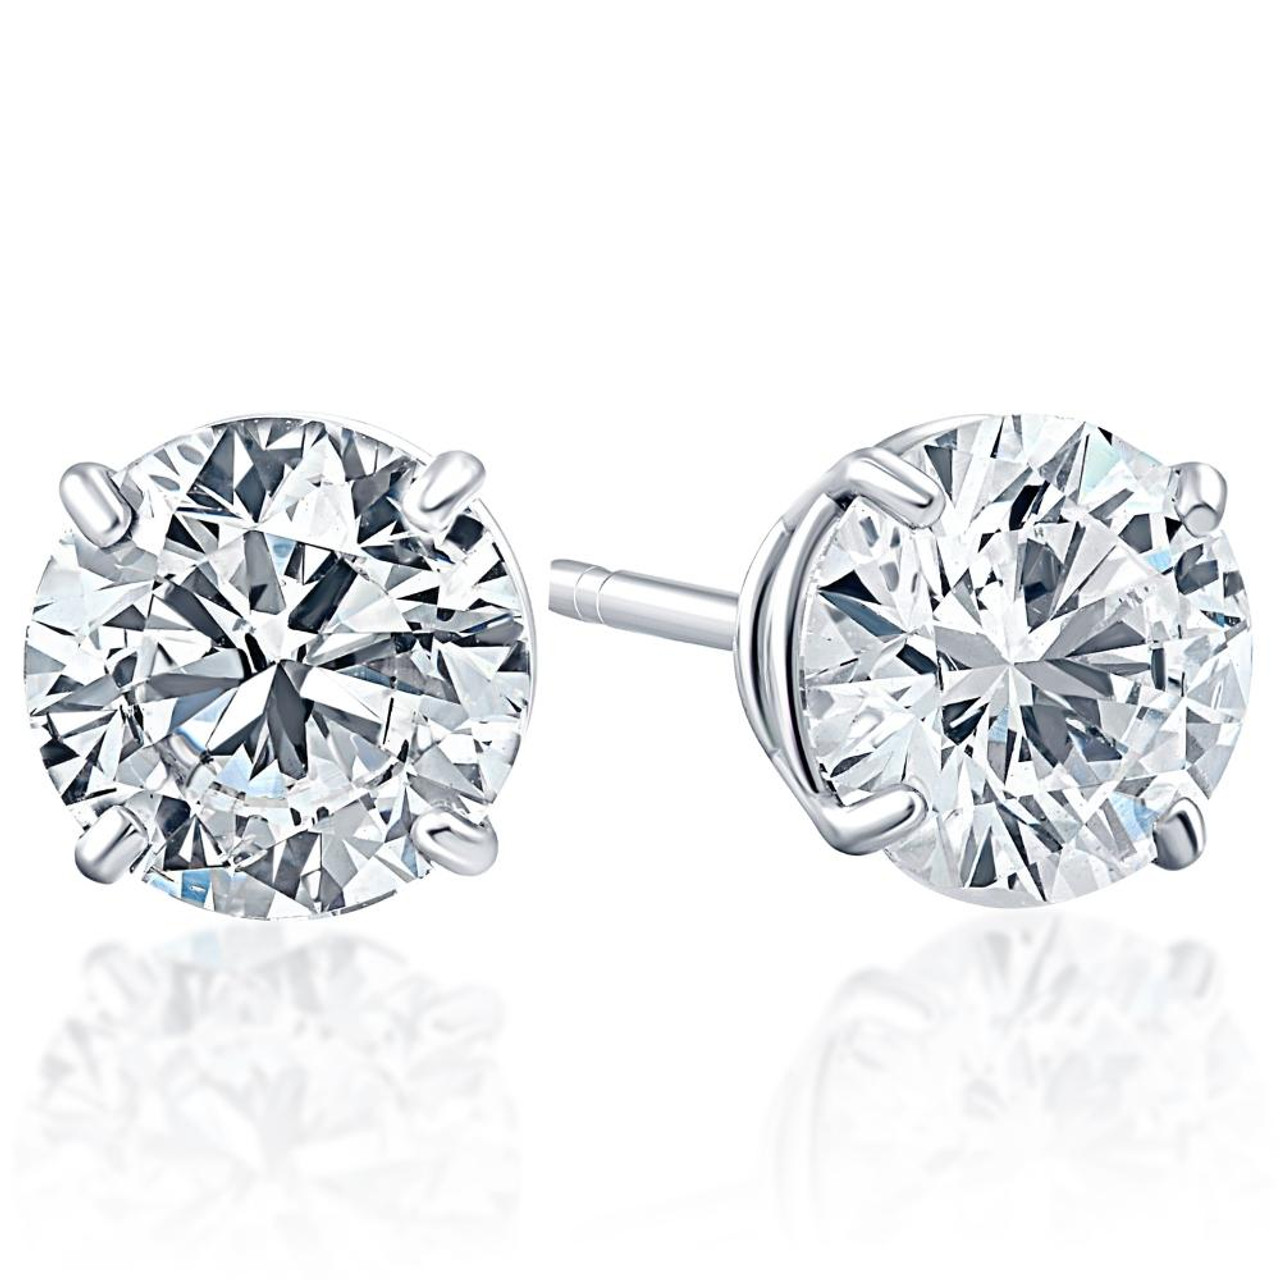 25Ct Round Brilliant Cut Natural Diamond Stud Earrings in 14K Gold